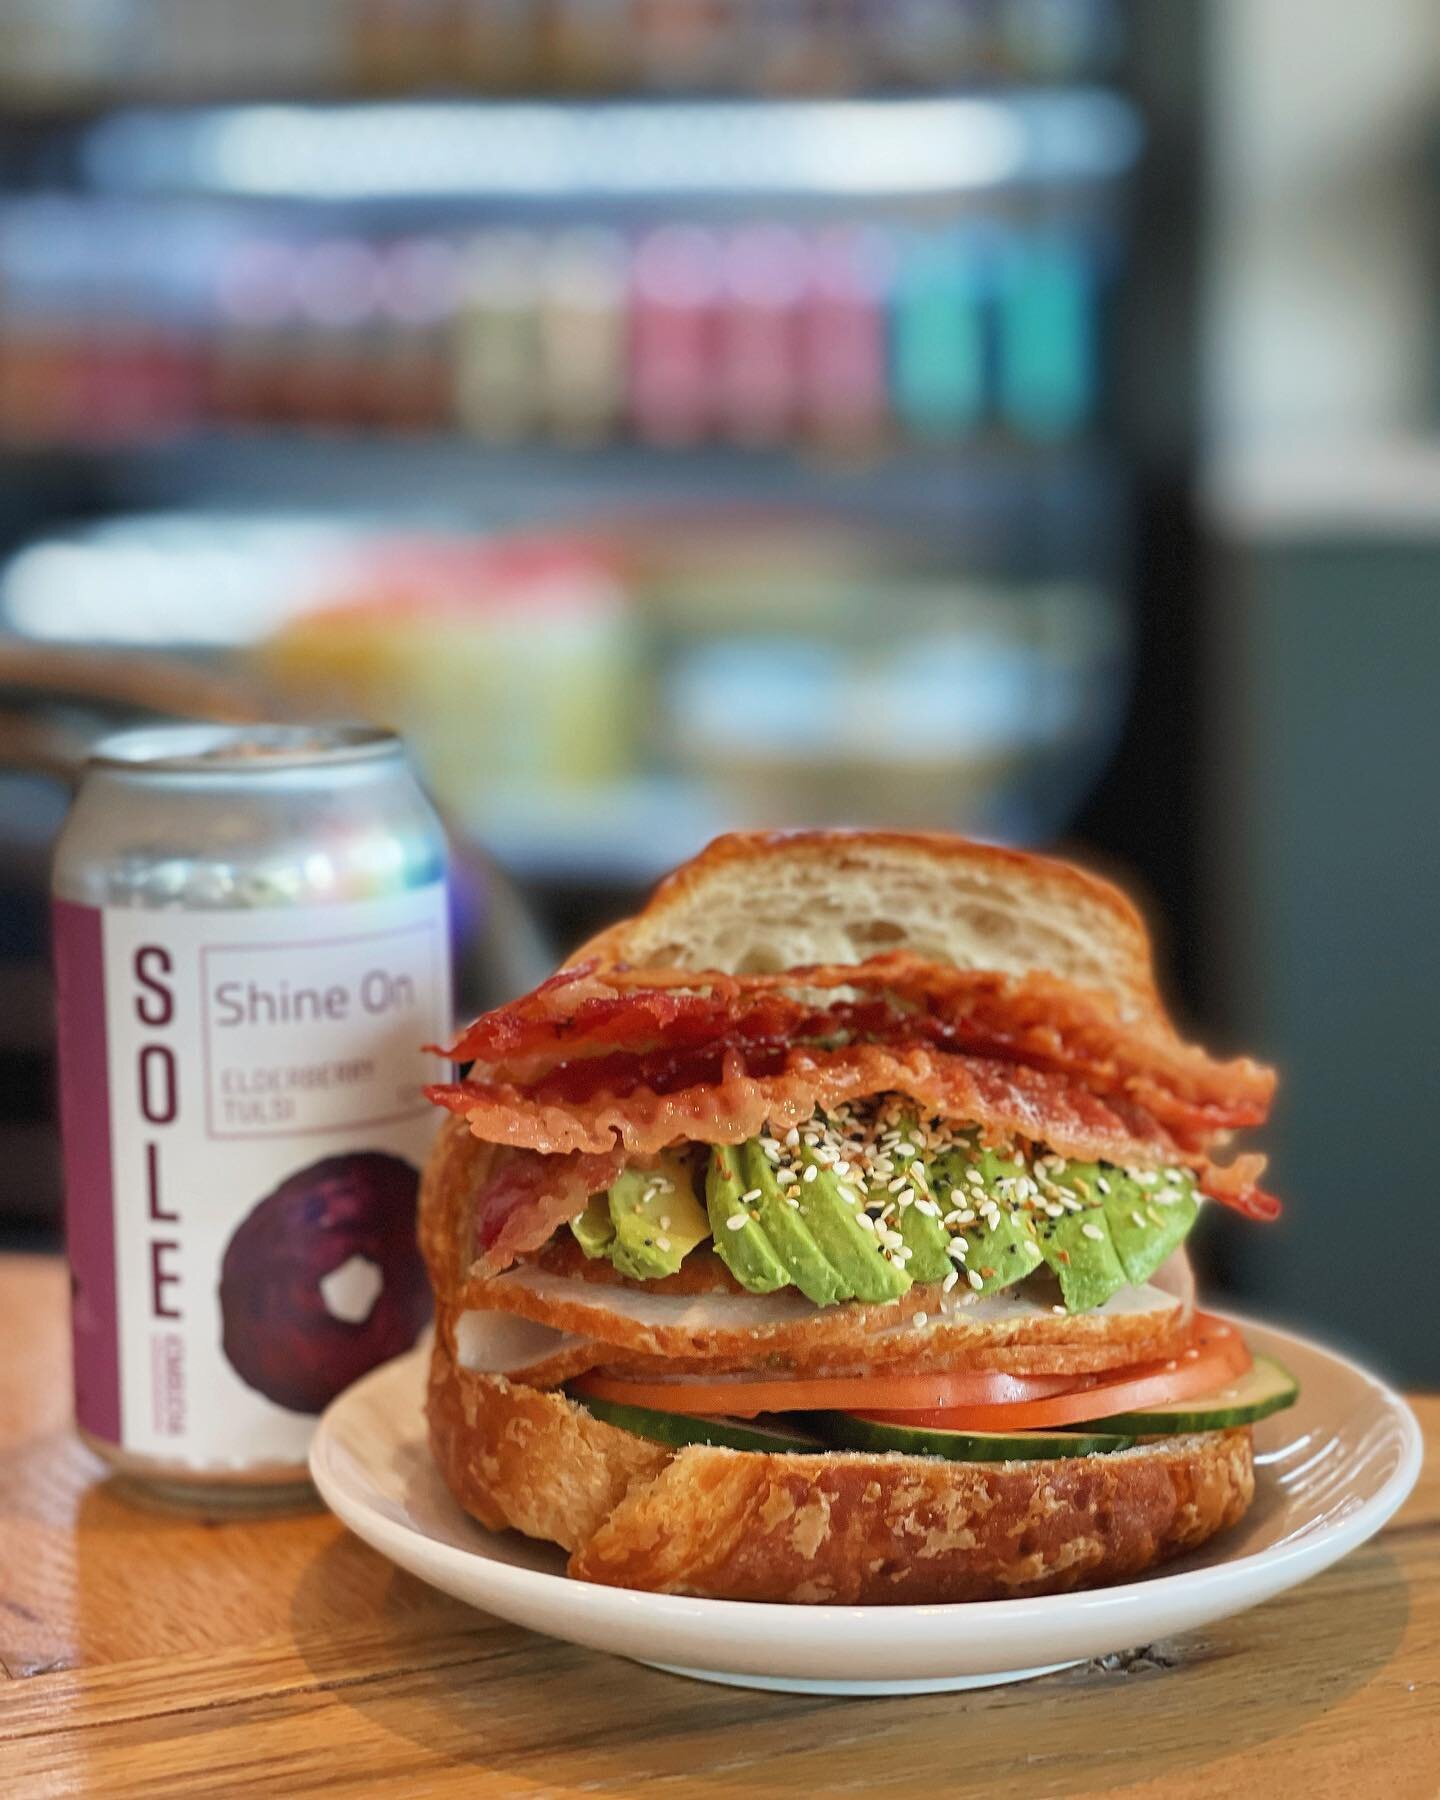 Thank heavens it&rsquo;s Friday. Celebrate with a turkey avo from Jessie&rsquo;s and a cold kombucha 🌞 #jessiesoflinwood #coffeecreamcommunity
.
.
.

#coffee #icecream #bakedgoods #lacolombe #lcservedhere #lightbite #downtheshore #linwoodnj #somersp